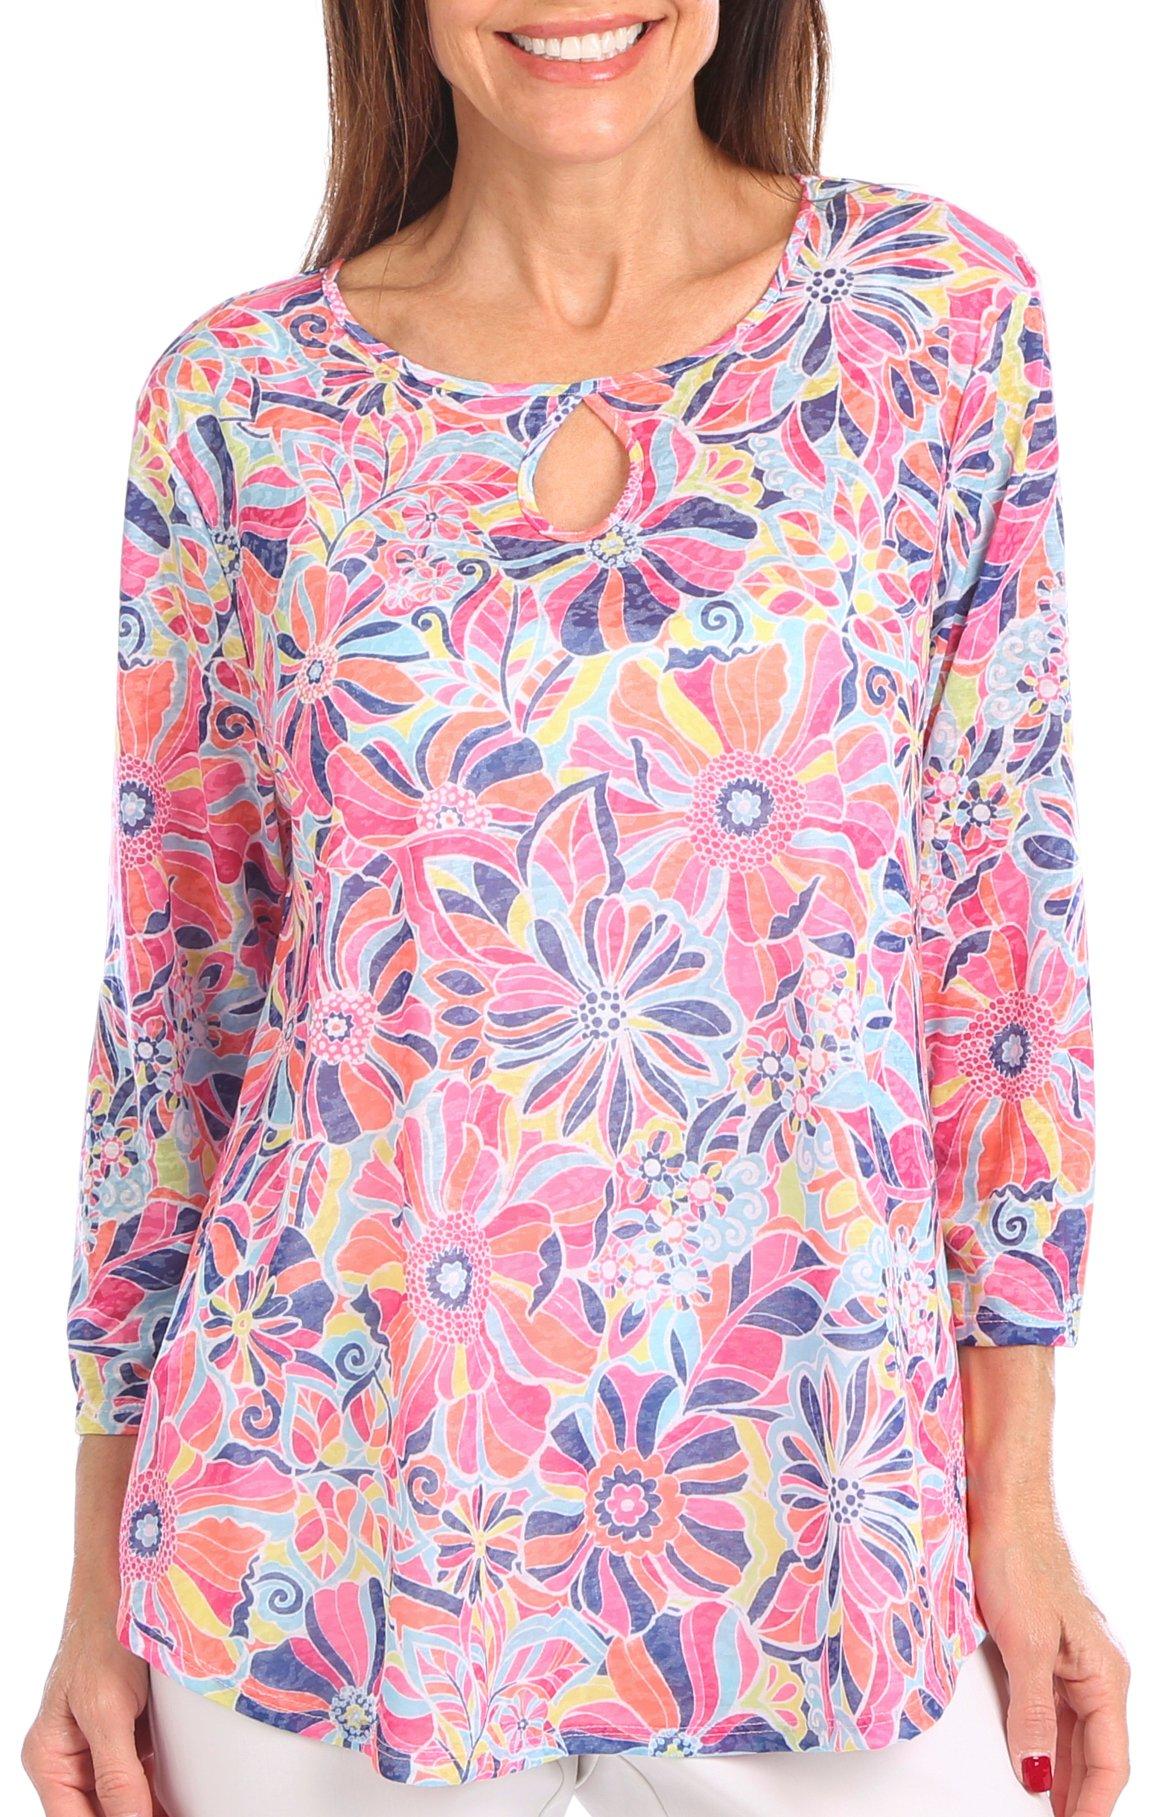 Ruby Road Womens Burnout Floral Print Keyhole 3/4 Sleeve Top